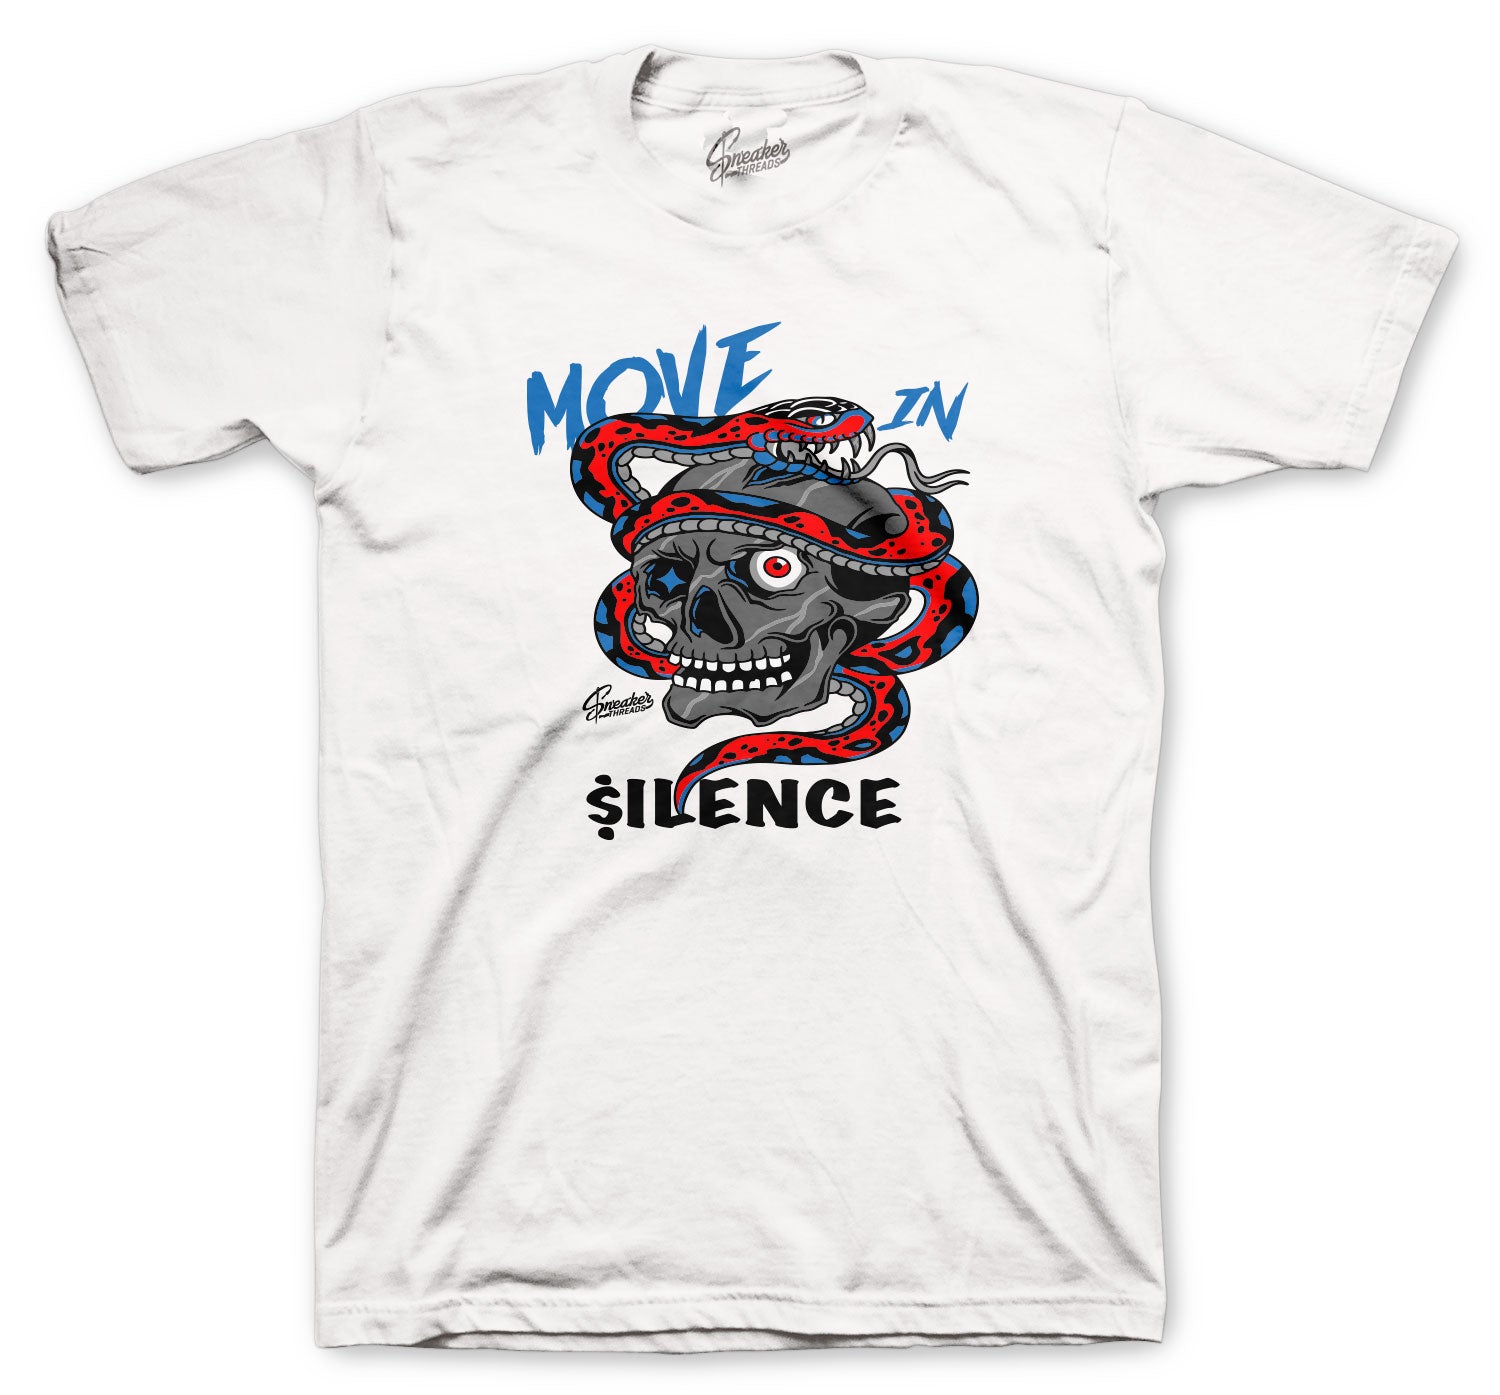 Retro 4 What The Four Shirts- Move In Silence - White